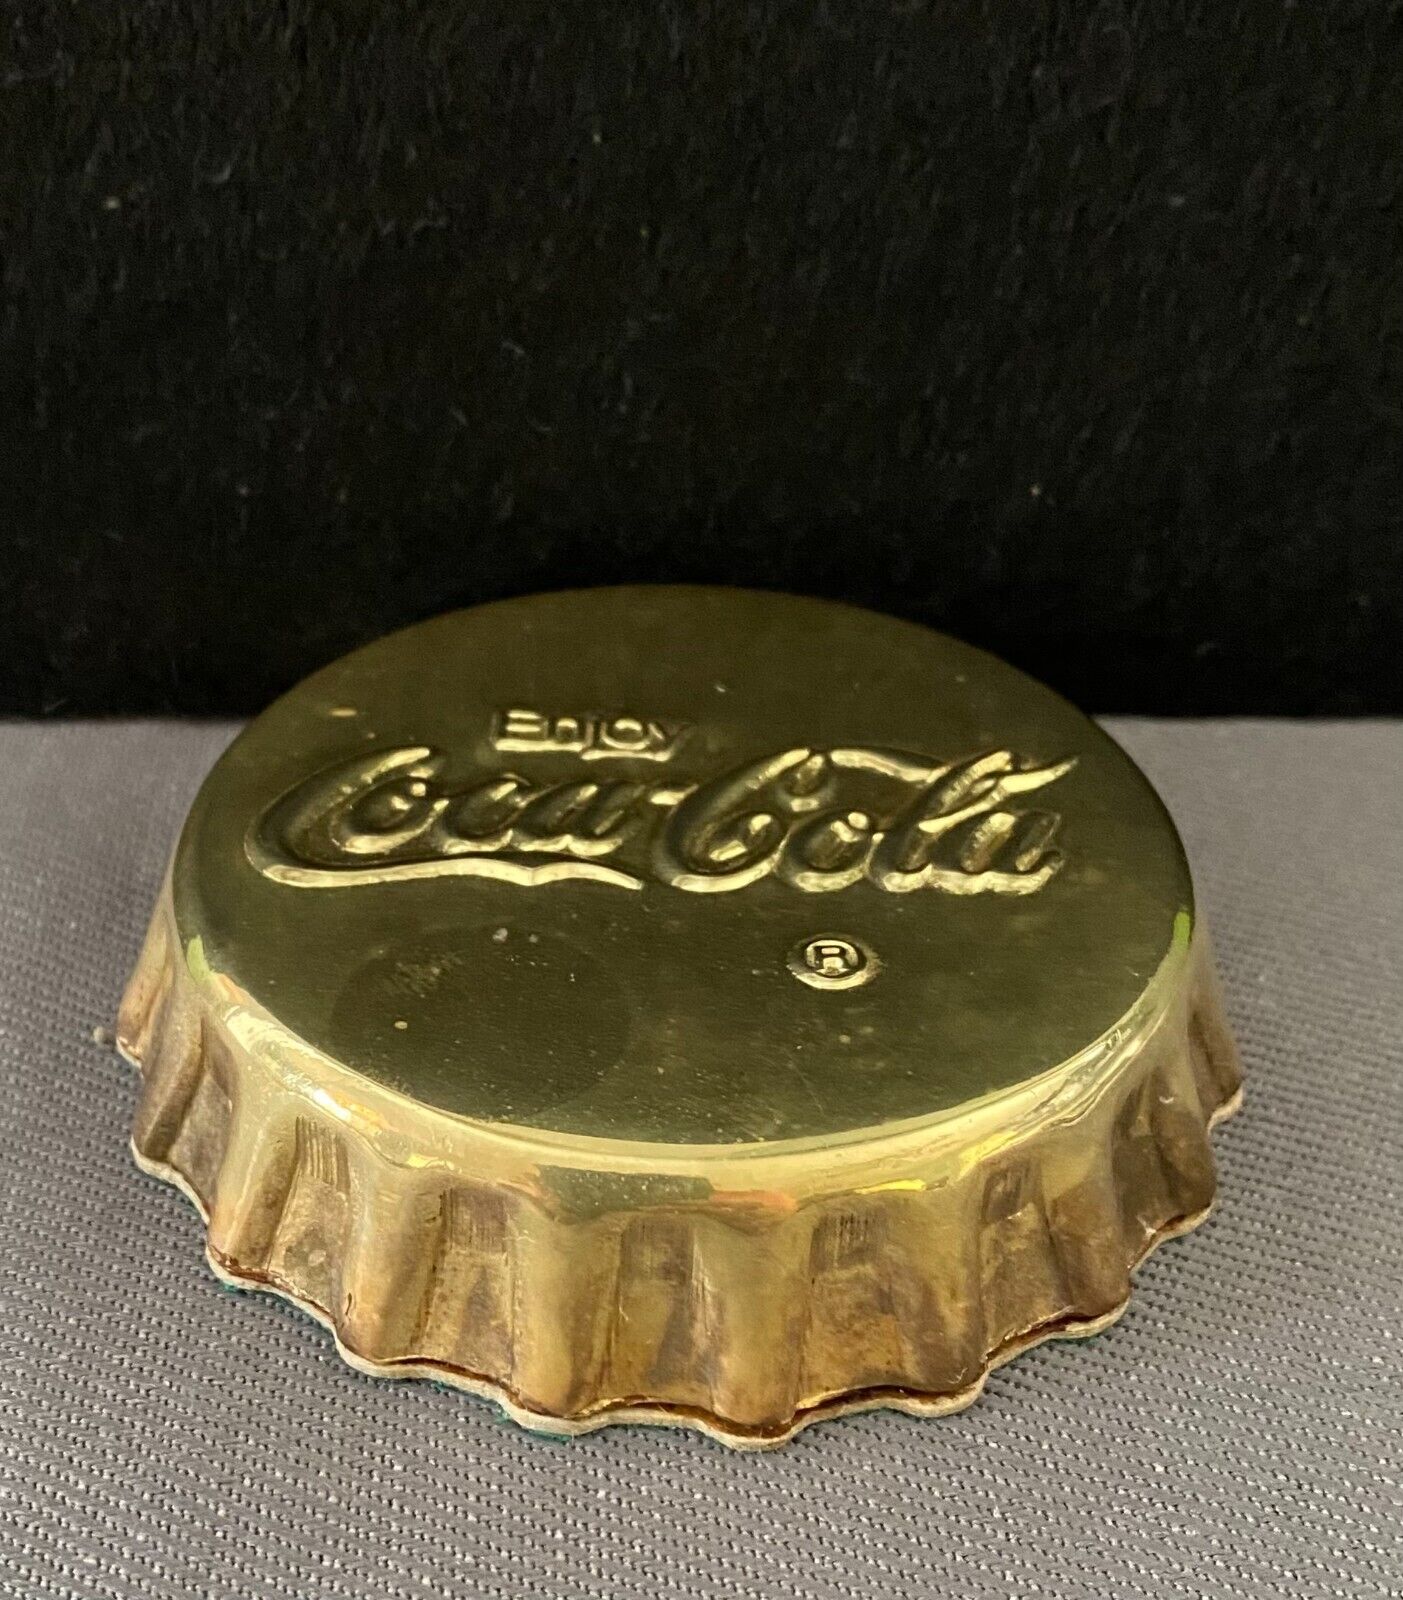 Vintage Coca-Cola Brass Crown Shaped Paperweight. Very good condition.